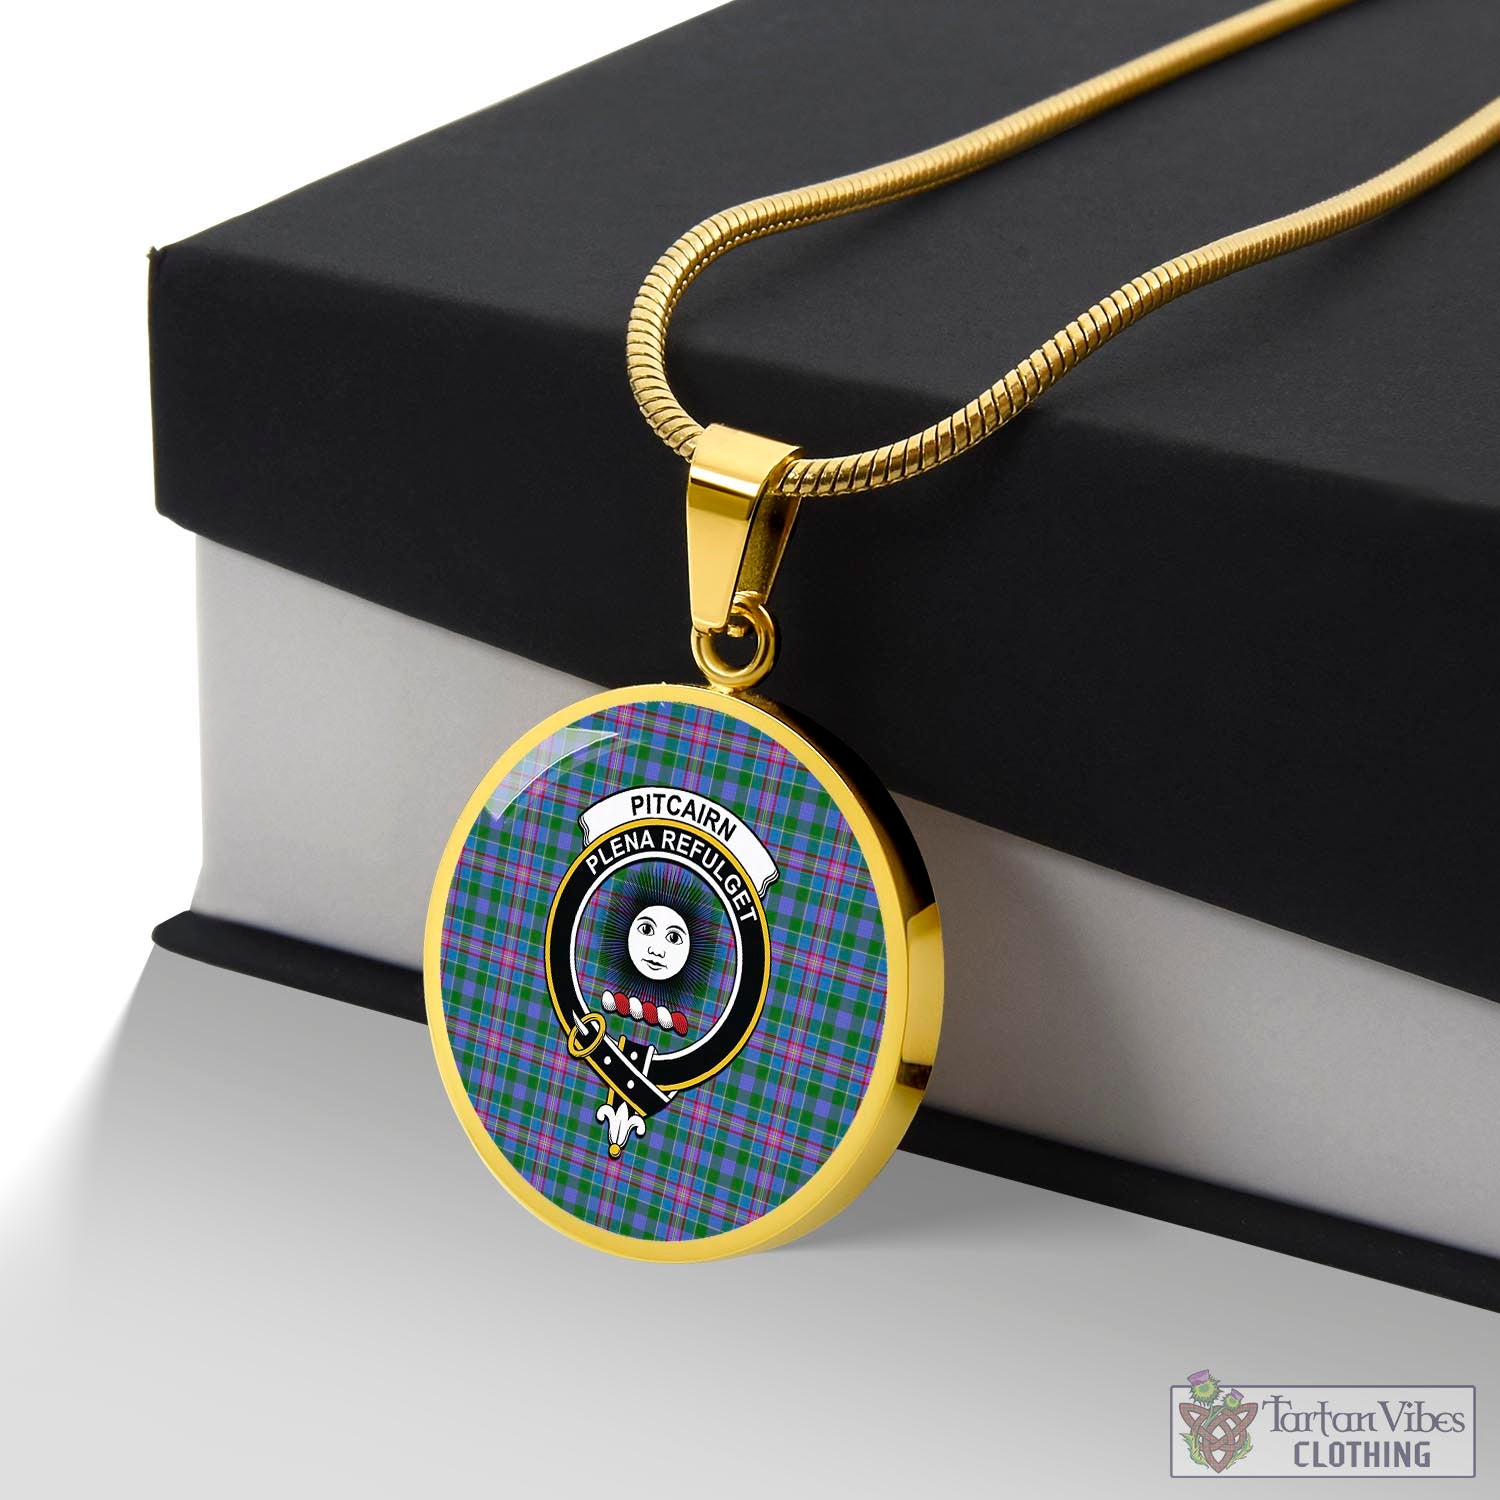 Tartan Vibes Clothing Pitcairn Hunting Tartan Circle Necklace with Family Crest